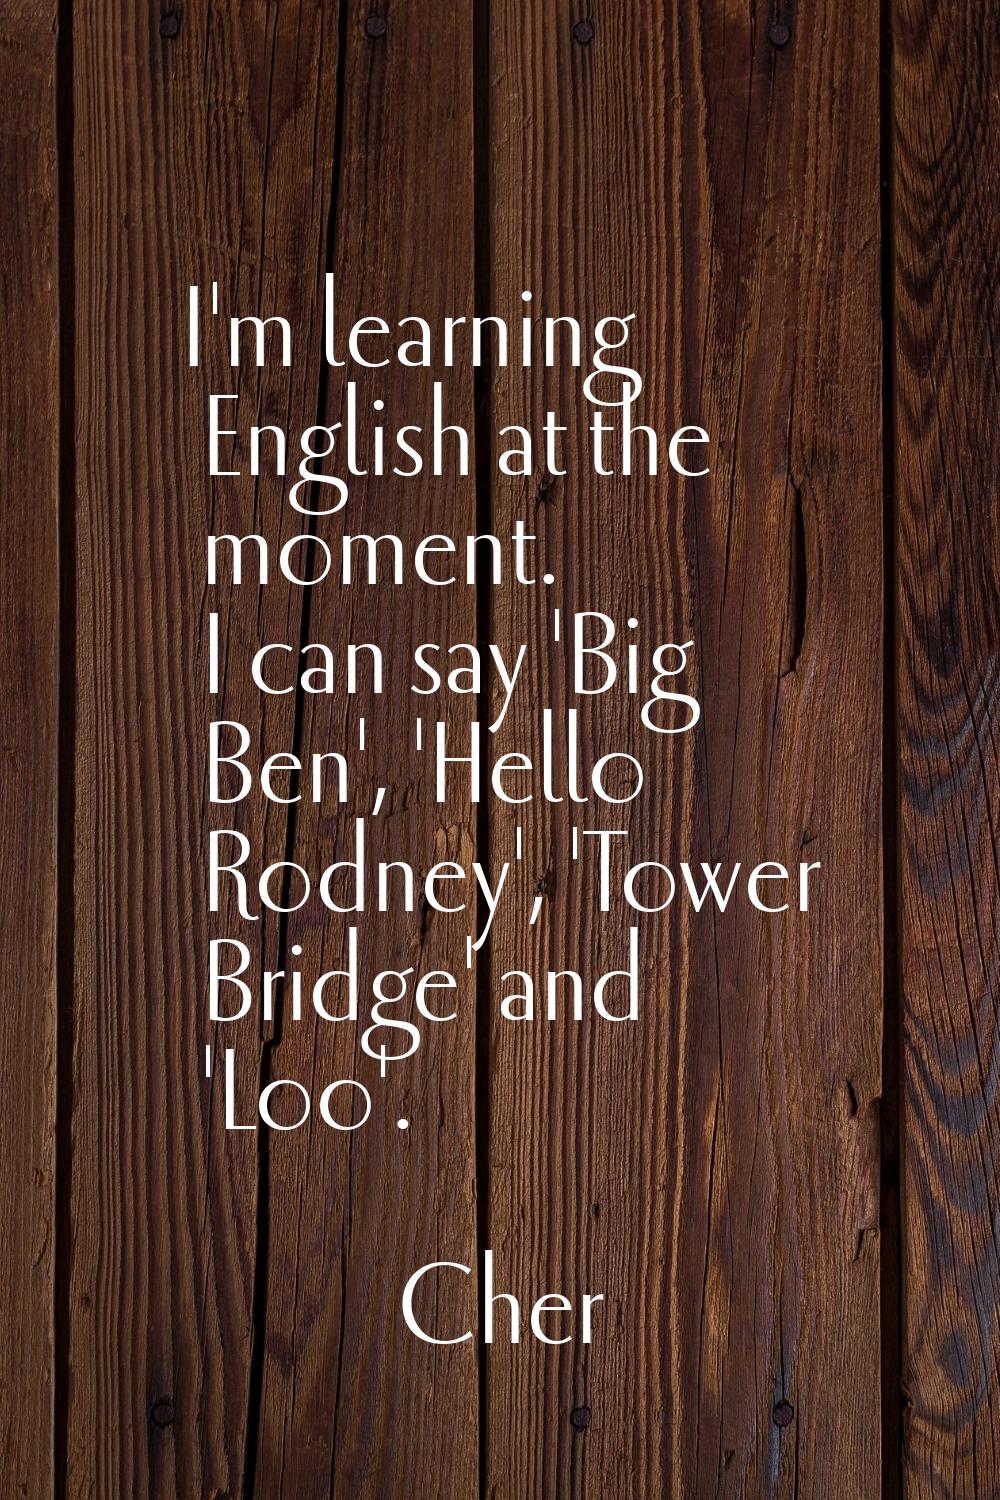 I'm learning English at the moment. I can say 'Big Ben', 'Hello Rodney', 'Tower Bridge' and 'Loo'.